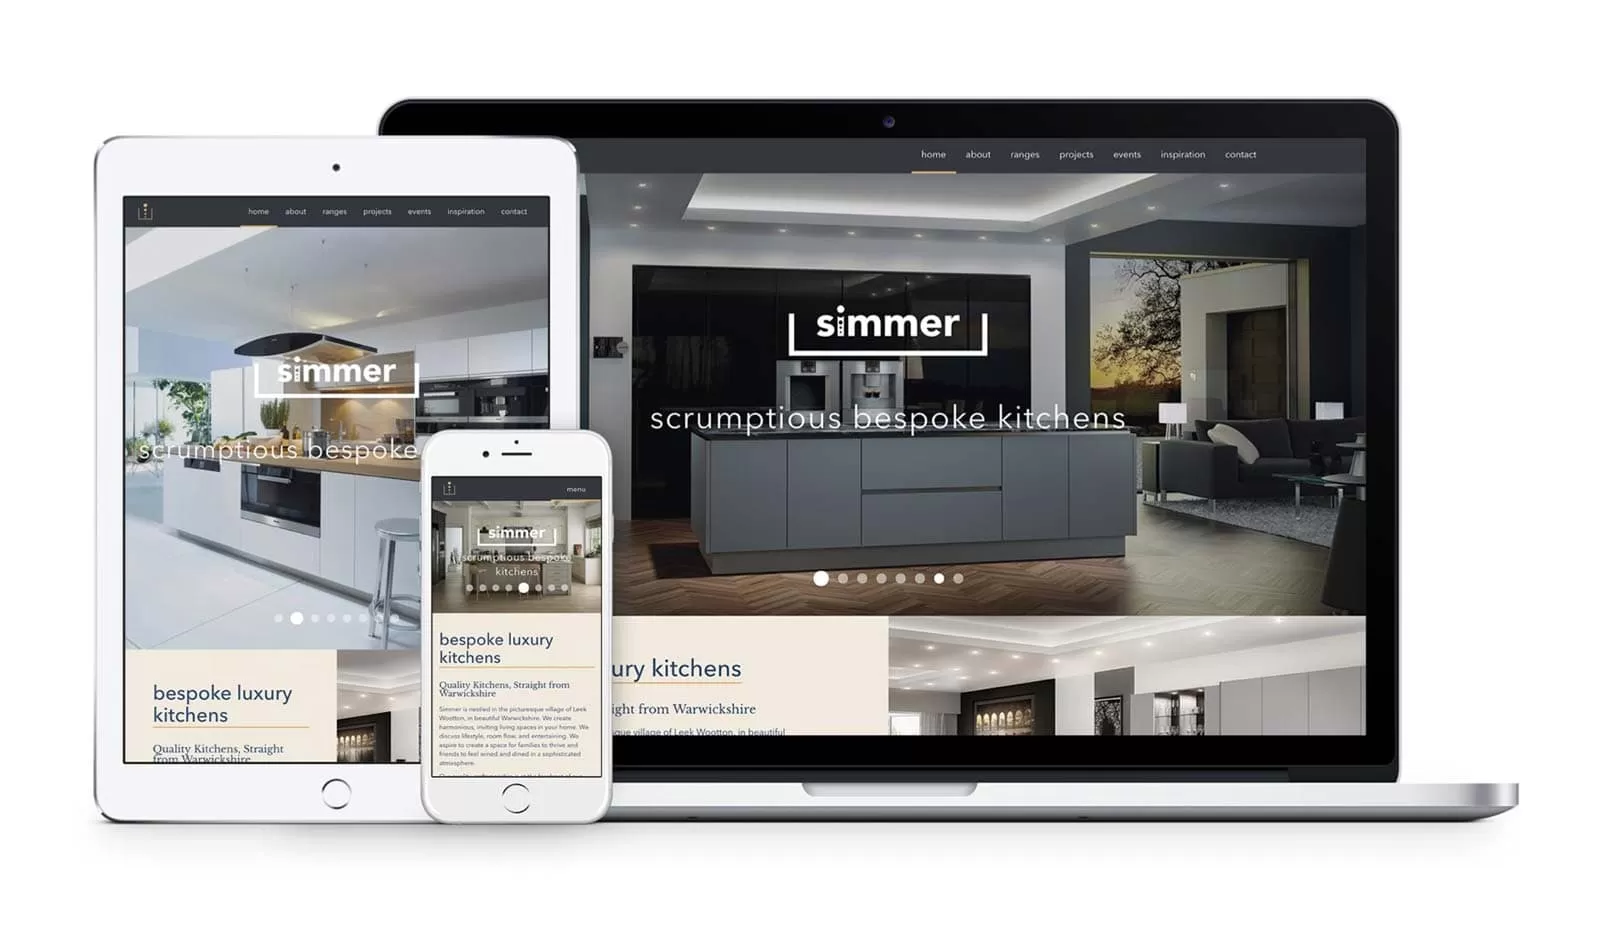 Simmer kitchens website showcased on different devices